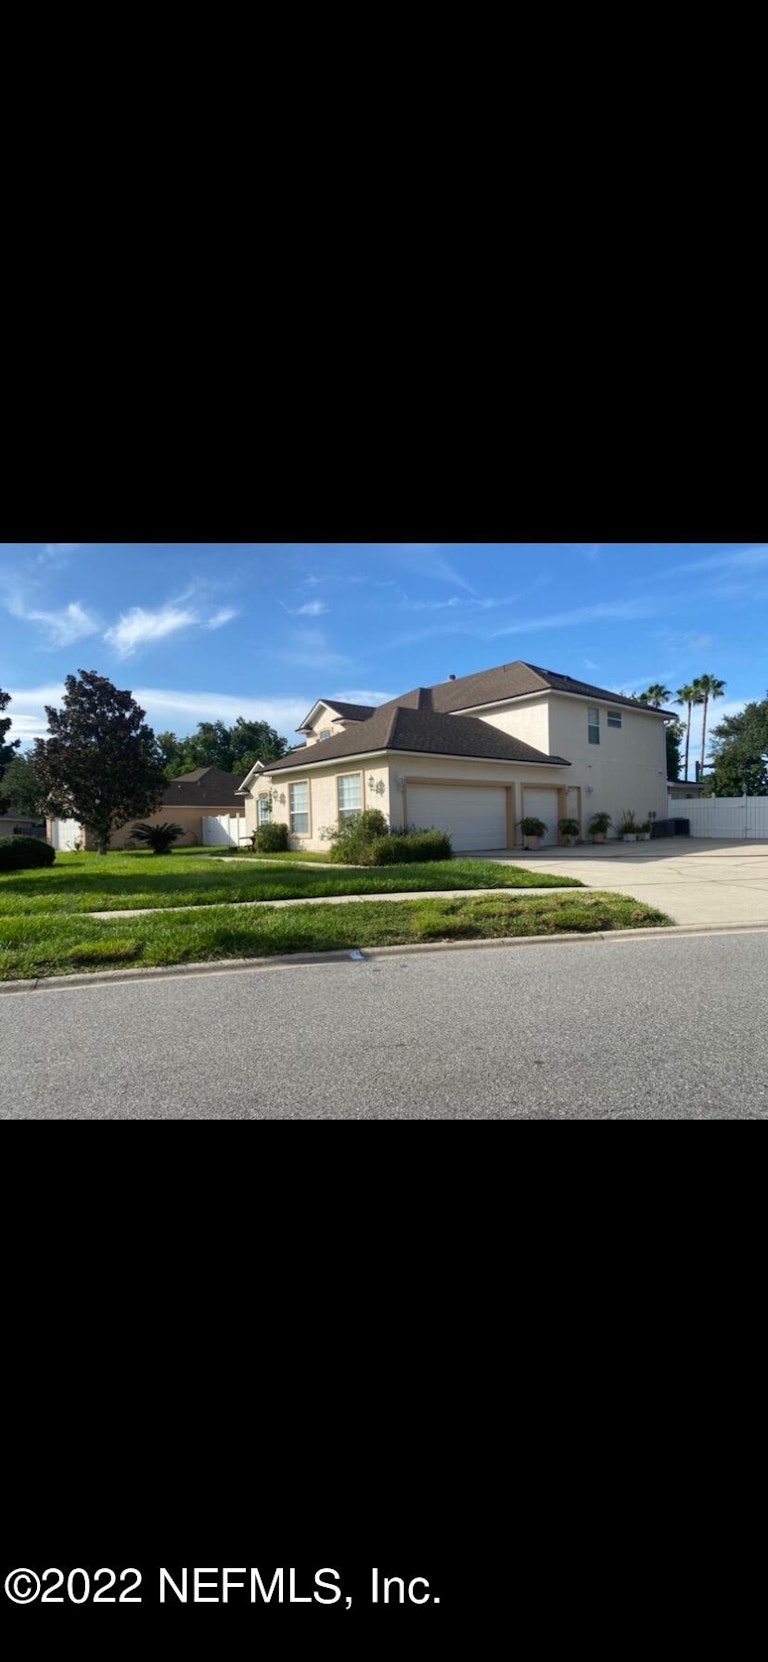 Photo 46 of 47 - 12037 Silver Star Ct, Jacksonville, FL 32246